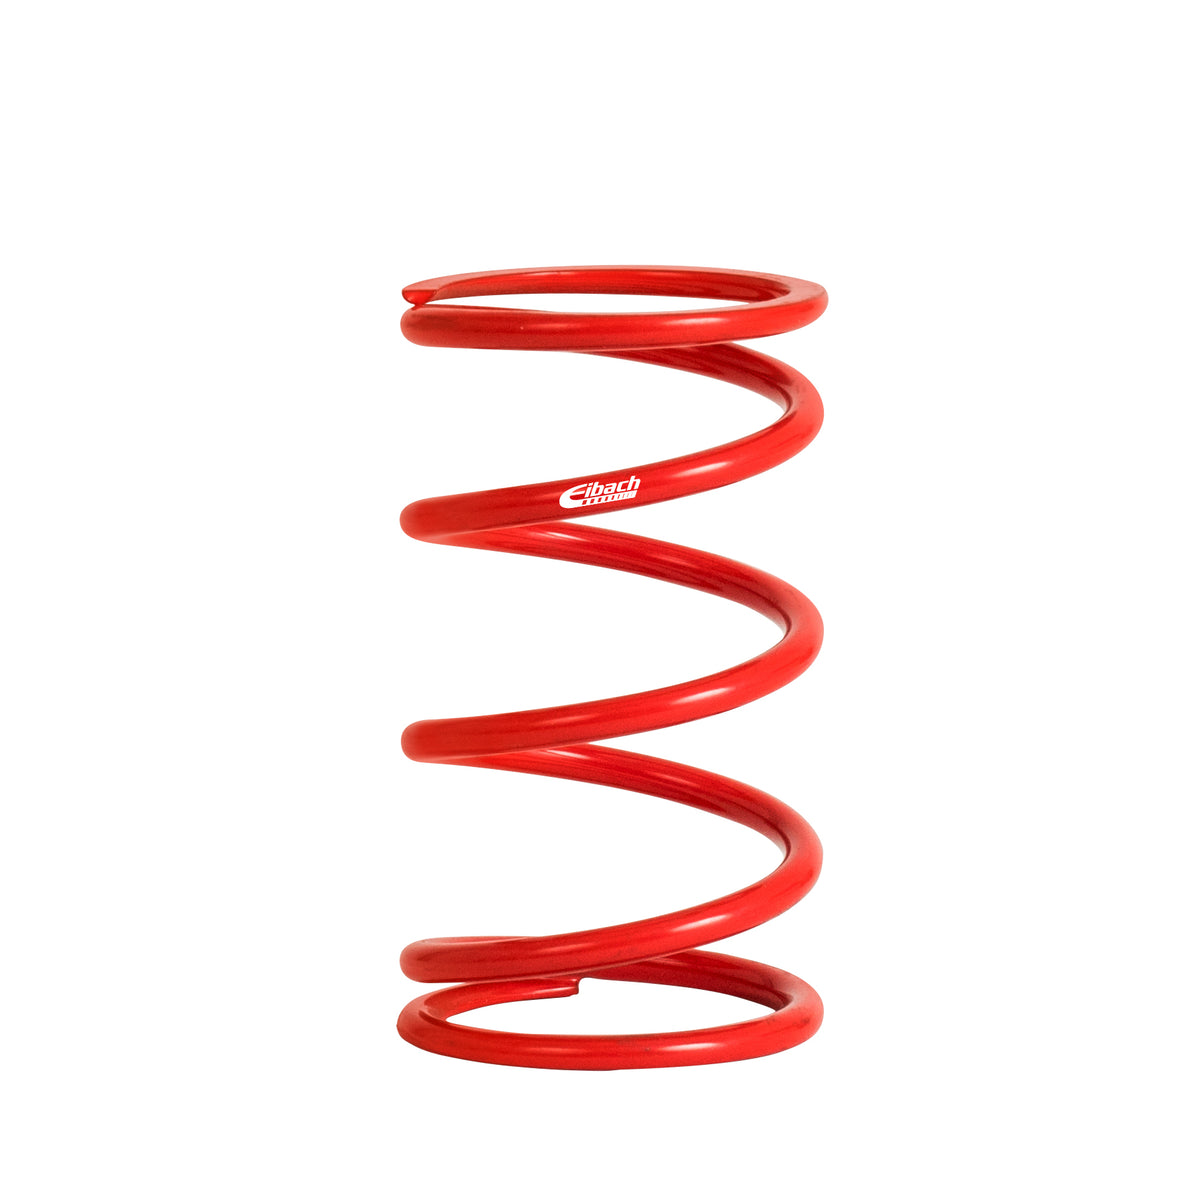 Eibach Metric Coilover Spring Dia. 2.36 in | Len: 5.51 in | Rate: 628 lbs/in - 140-60-0110